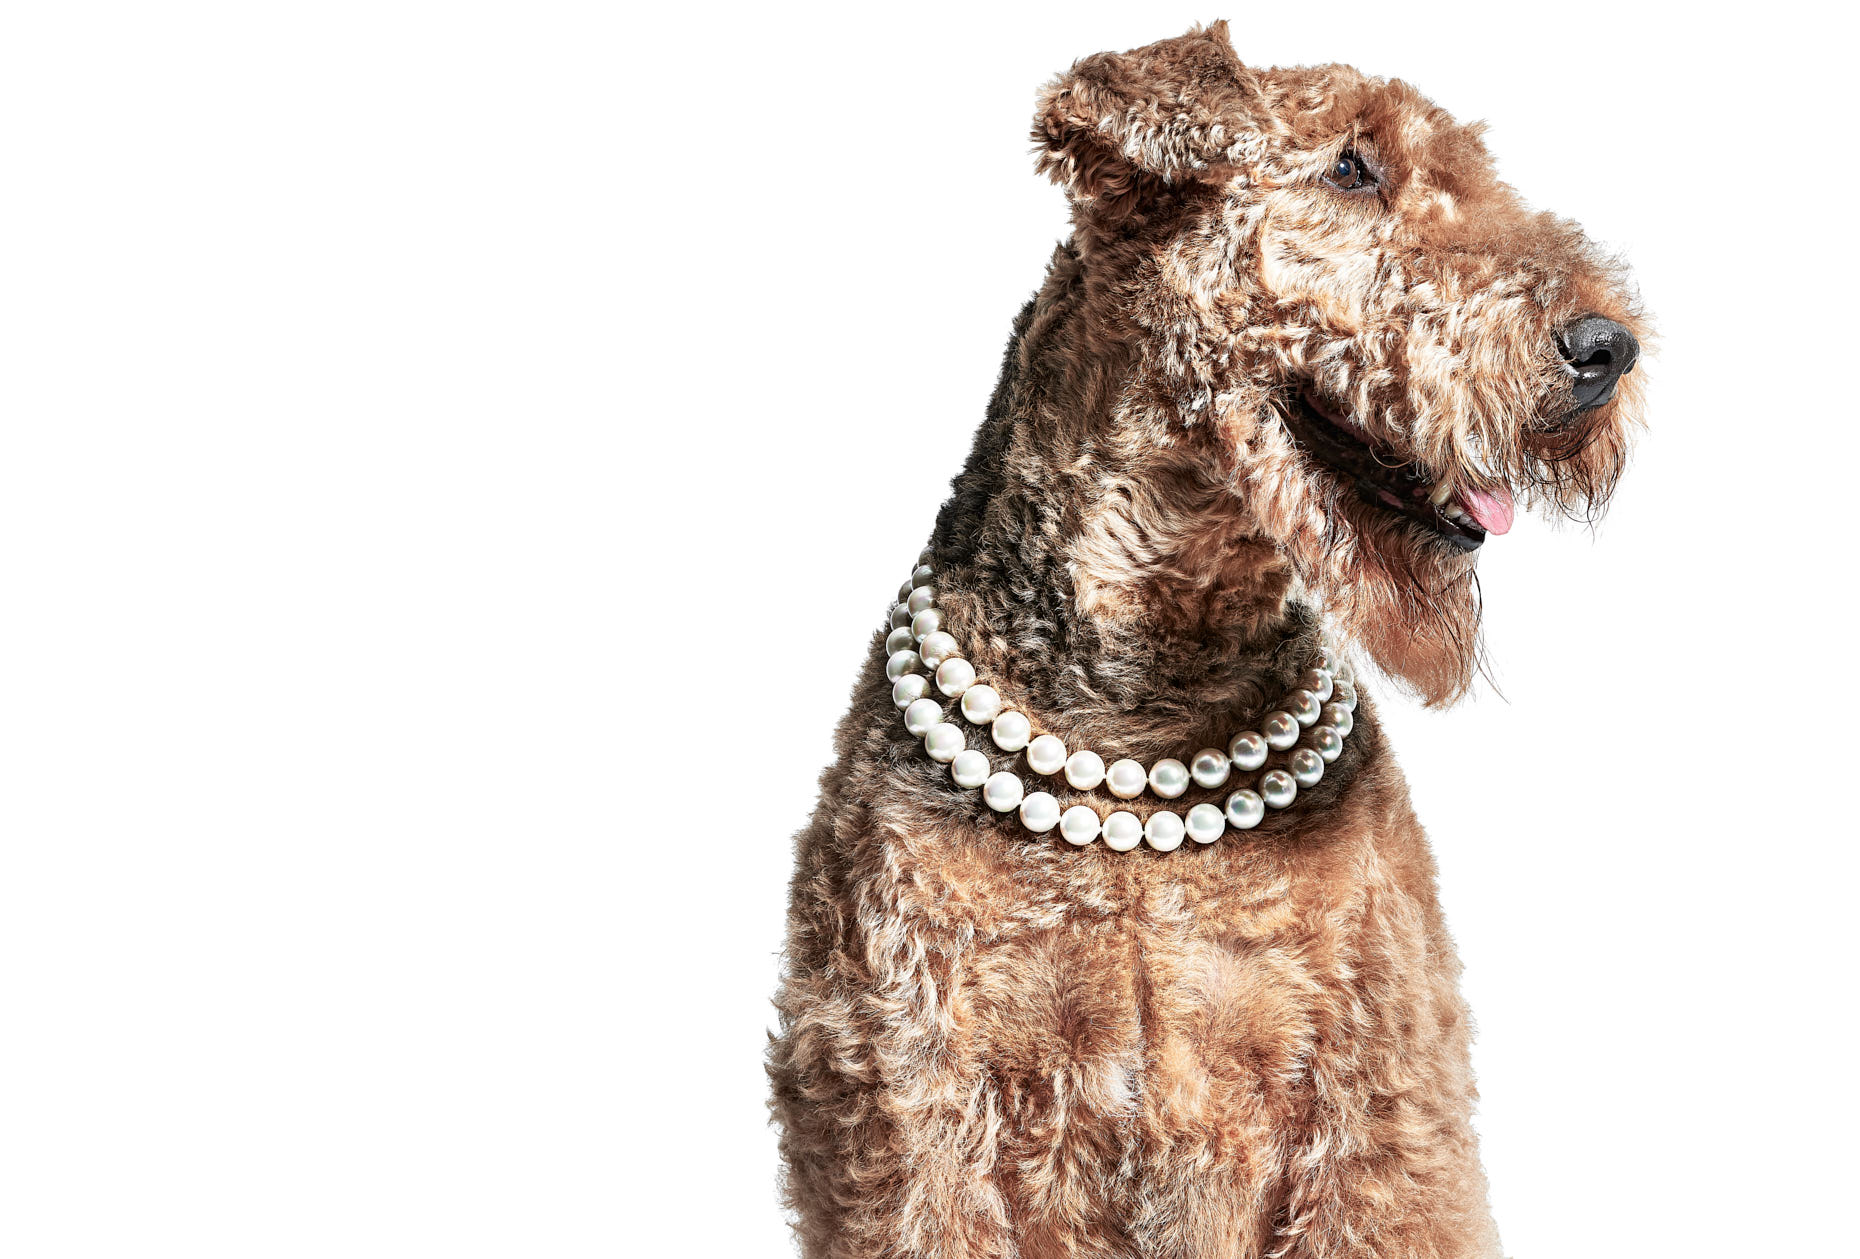 Jeff Stephens | Dogs in Pearls